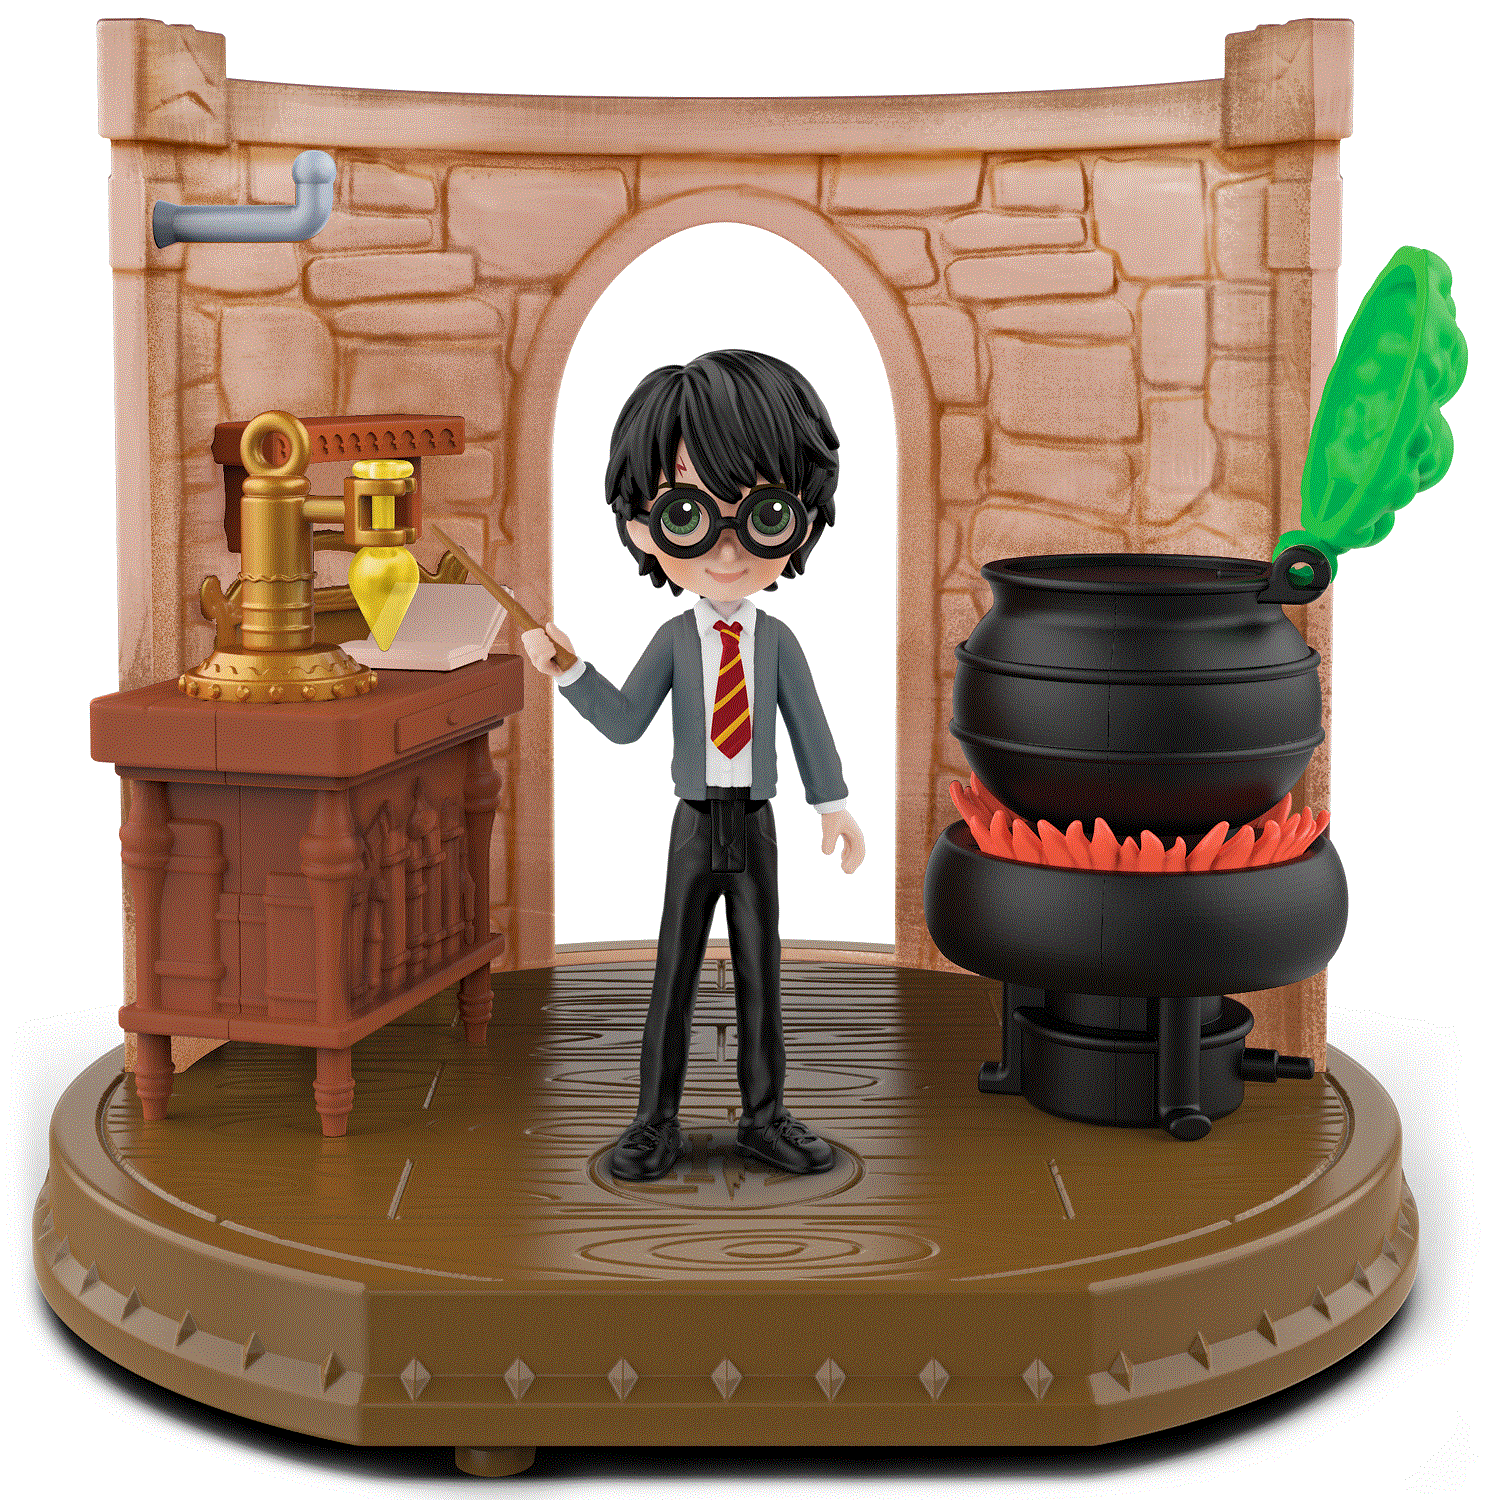 [6061847] Magical Charmers' Classroom Playsets